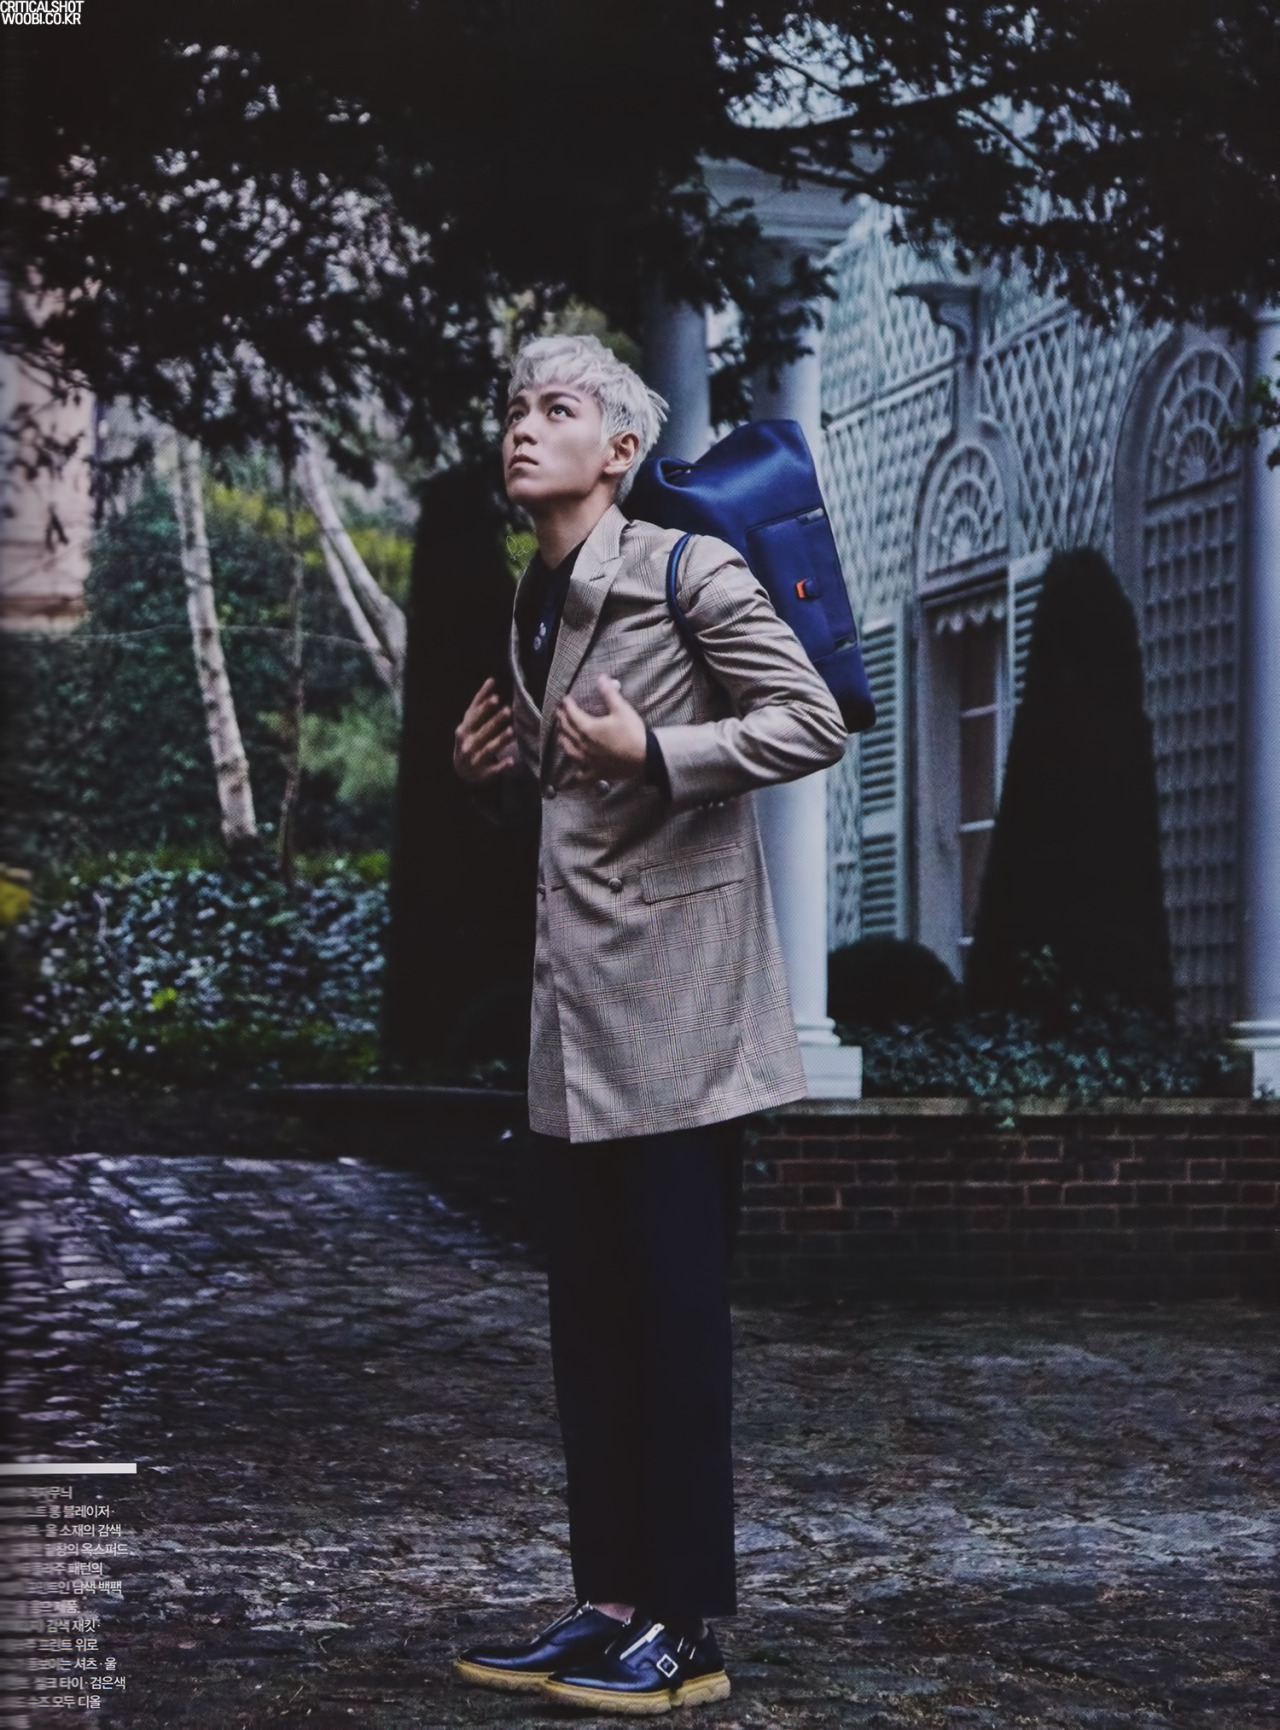 TOP Arena Homme March 2016 scans by CriticalShot (2).png